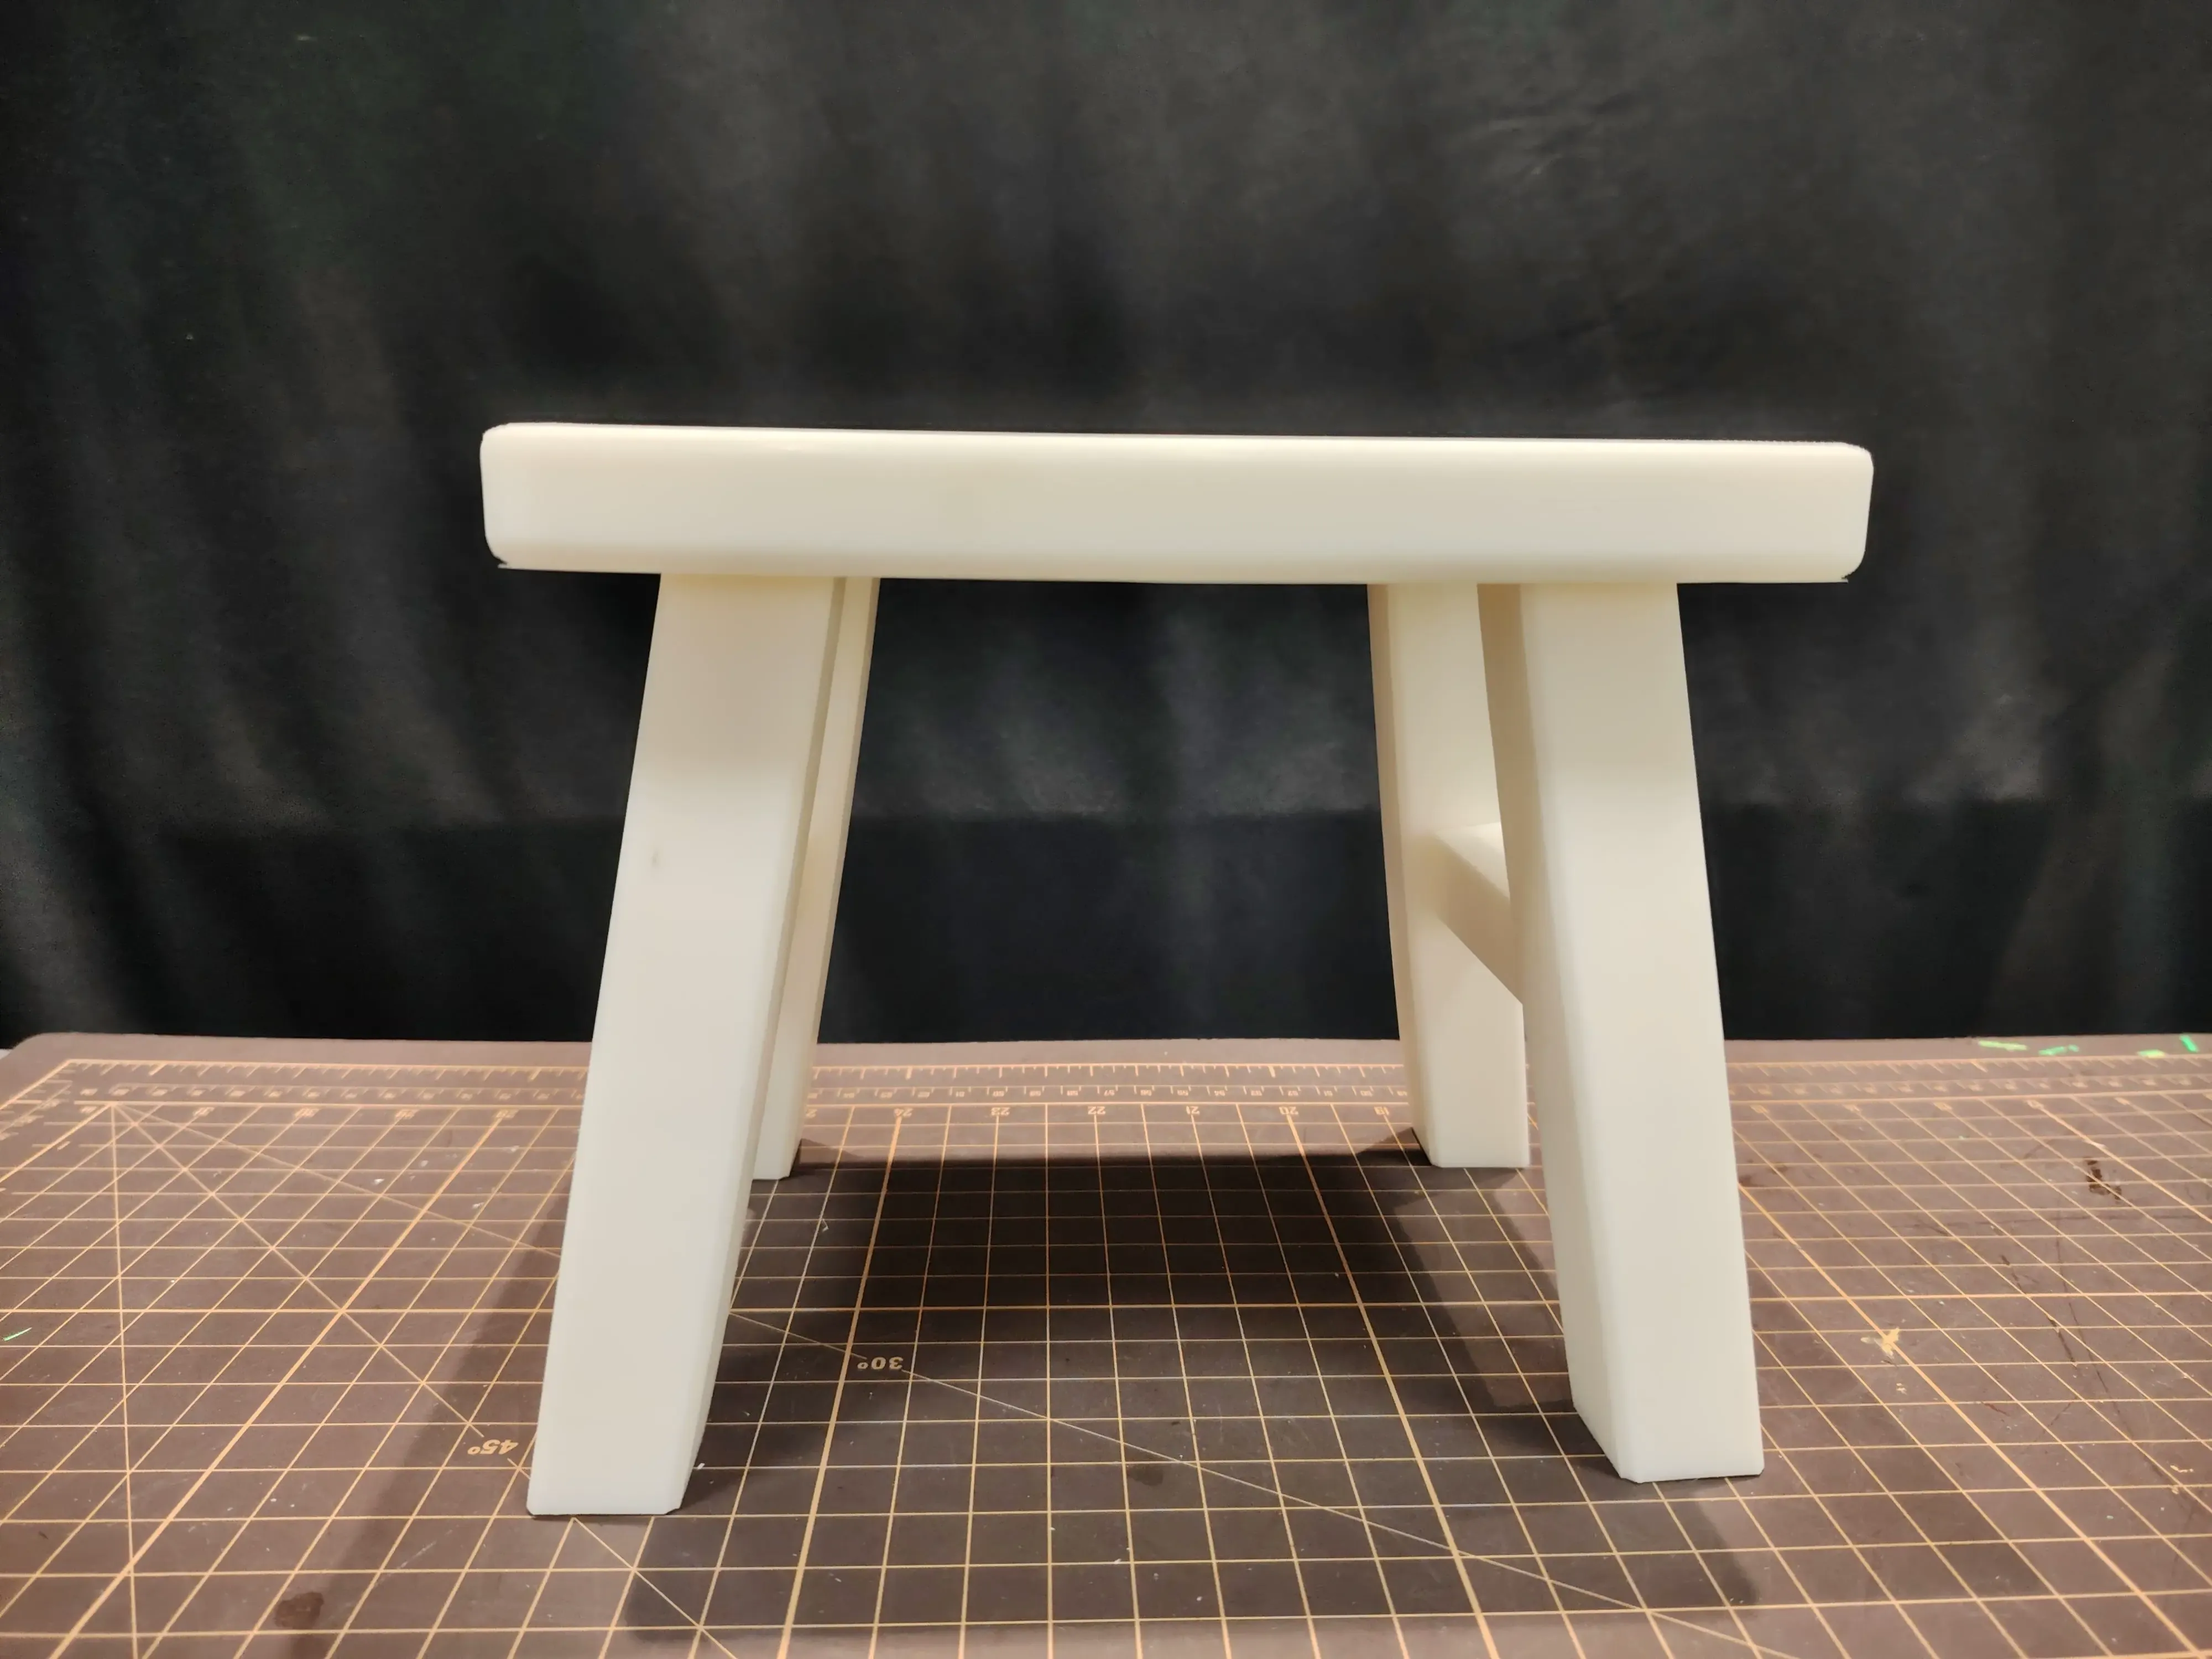 Functional and practical stool